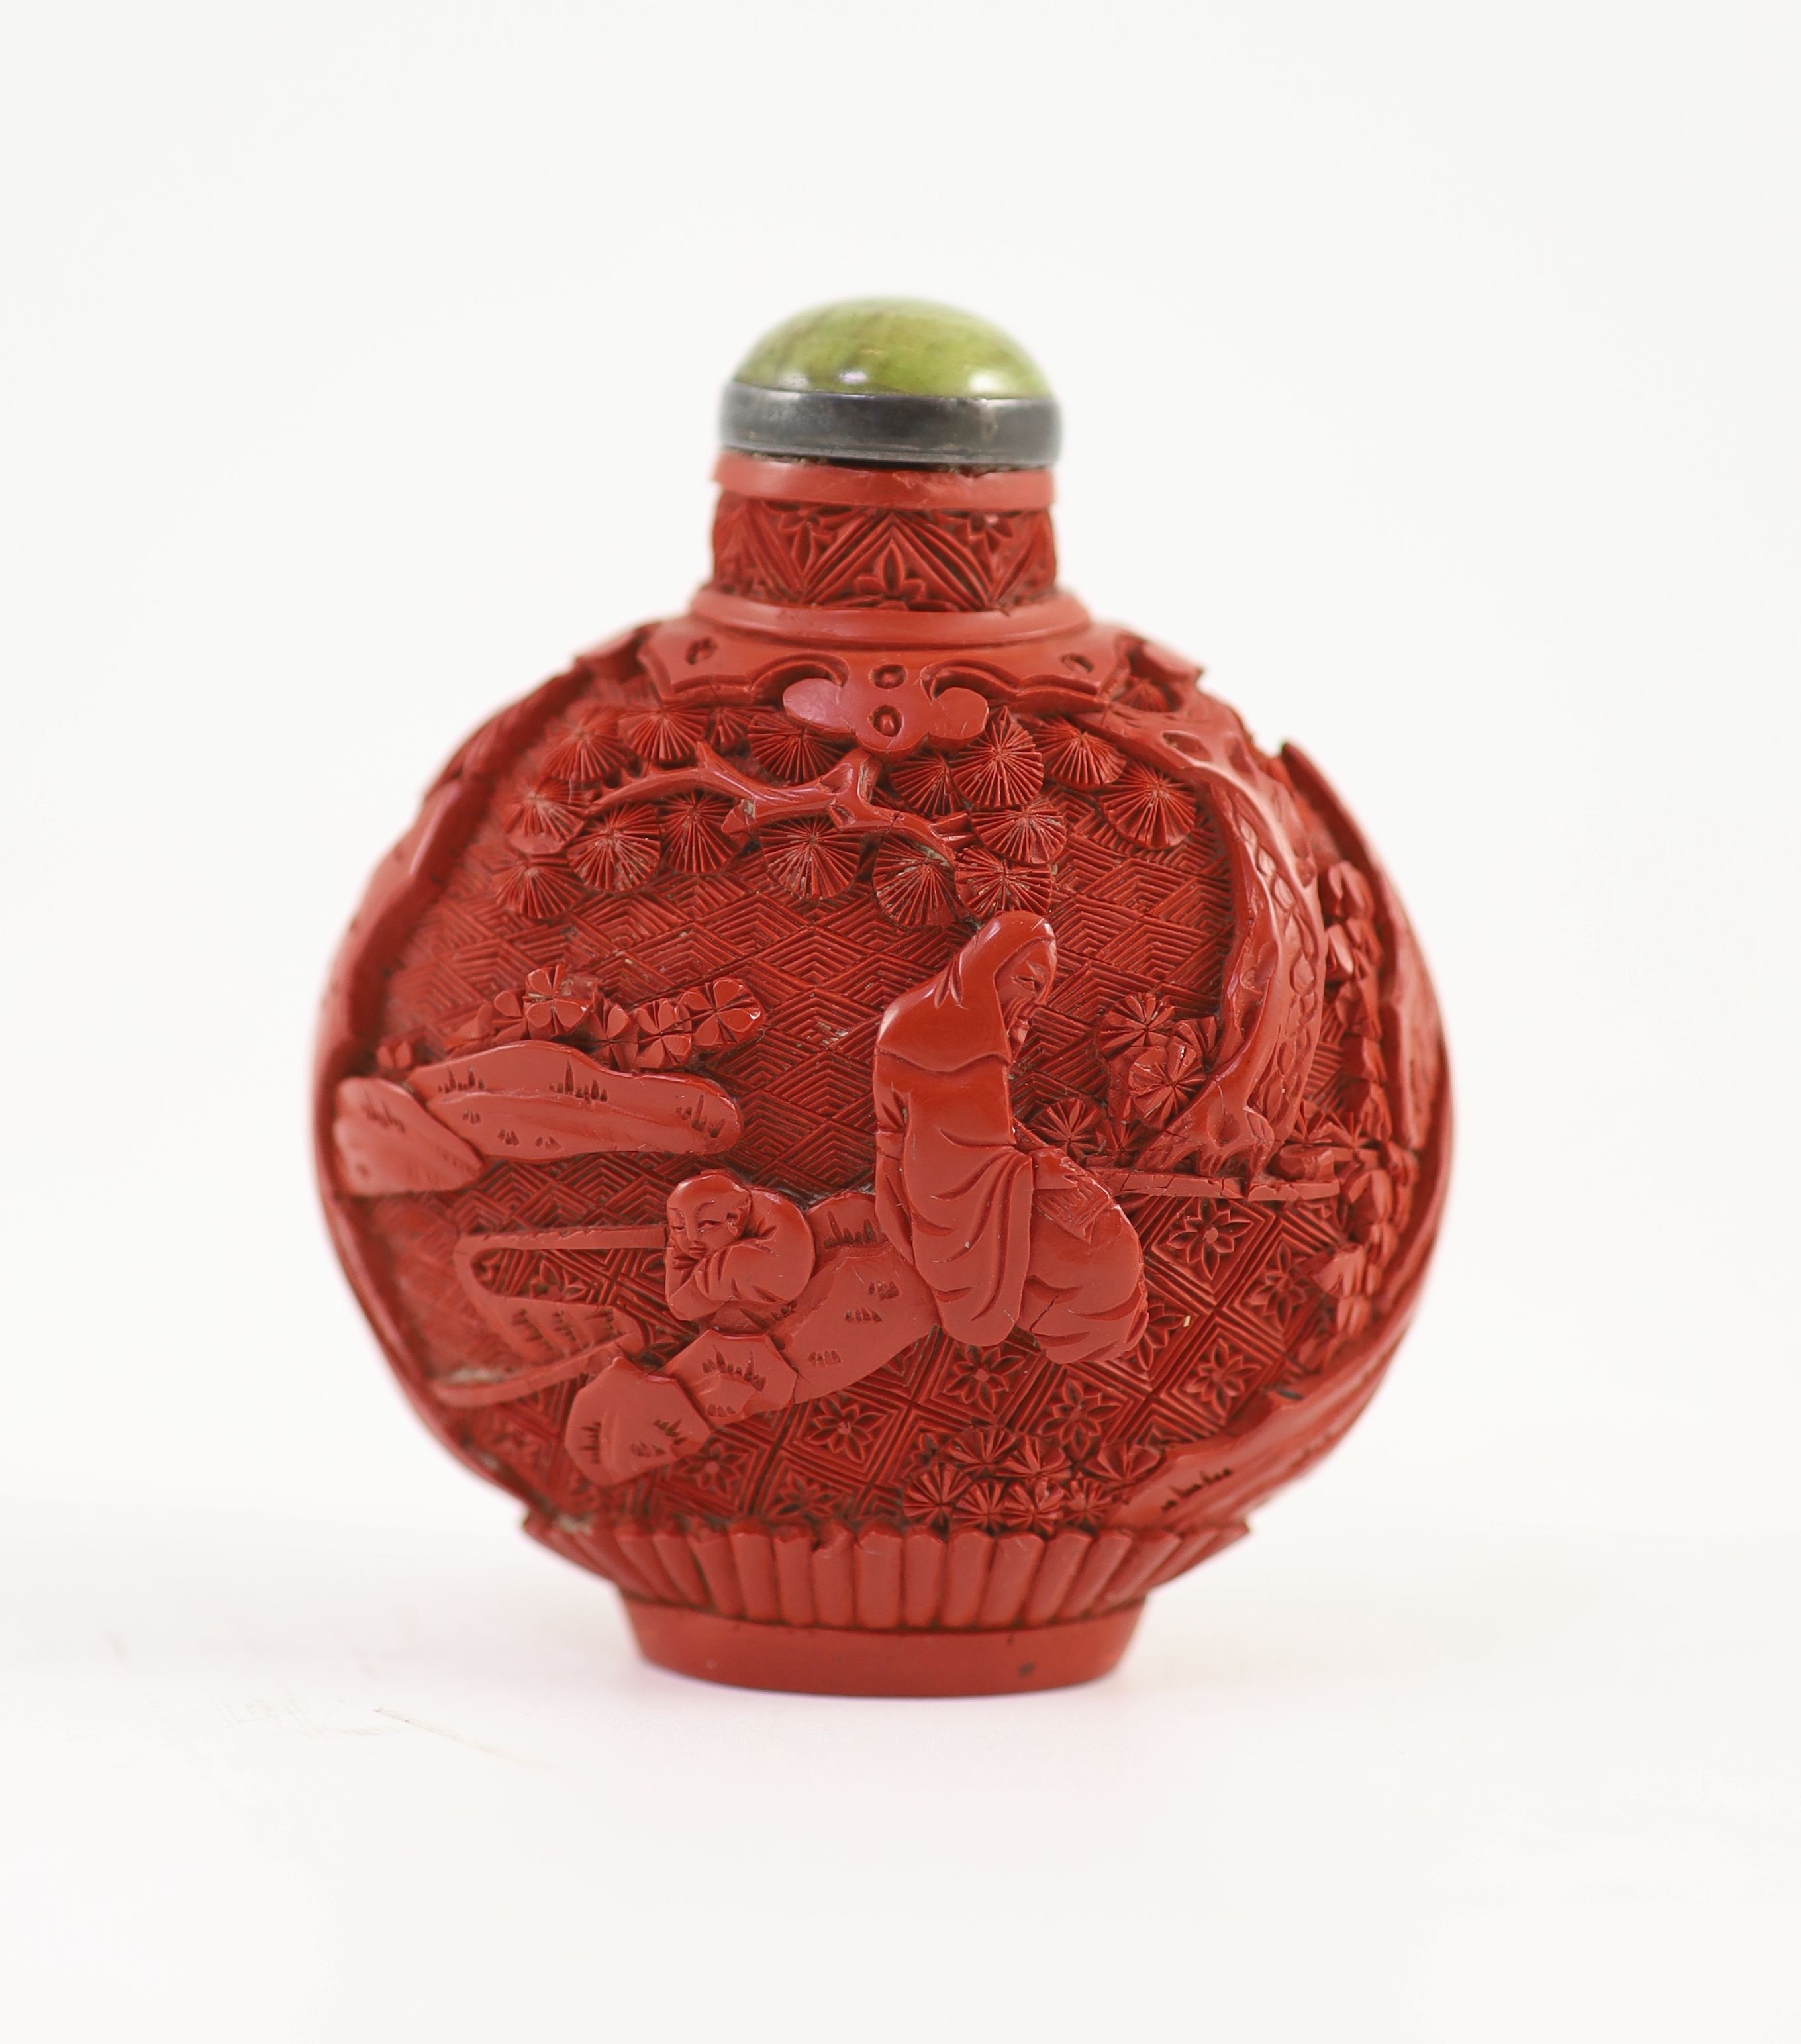 An unusual Chinese cinnabar lacquer on porcelain snuff bottle, 18th/19th century 6.2 cm high excluding stopper